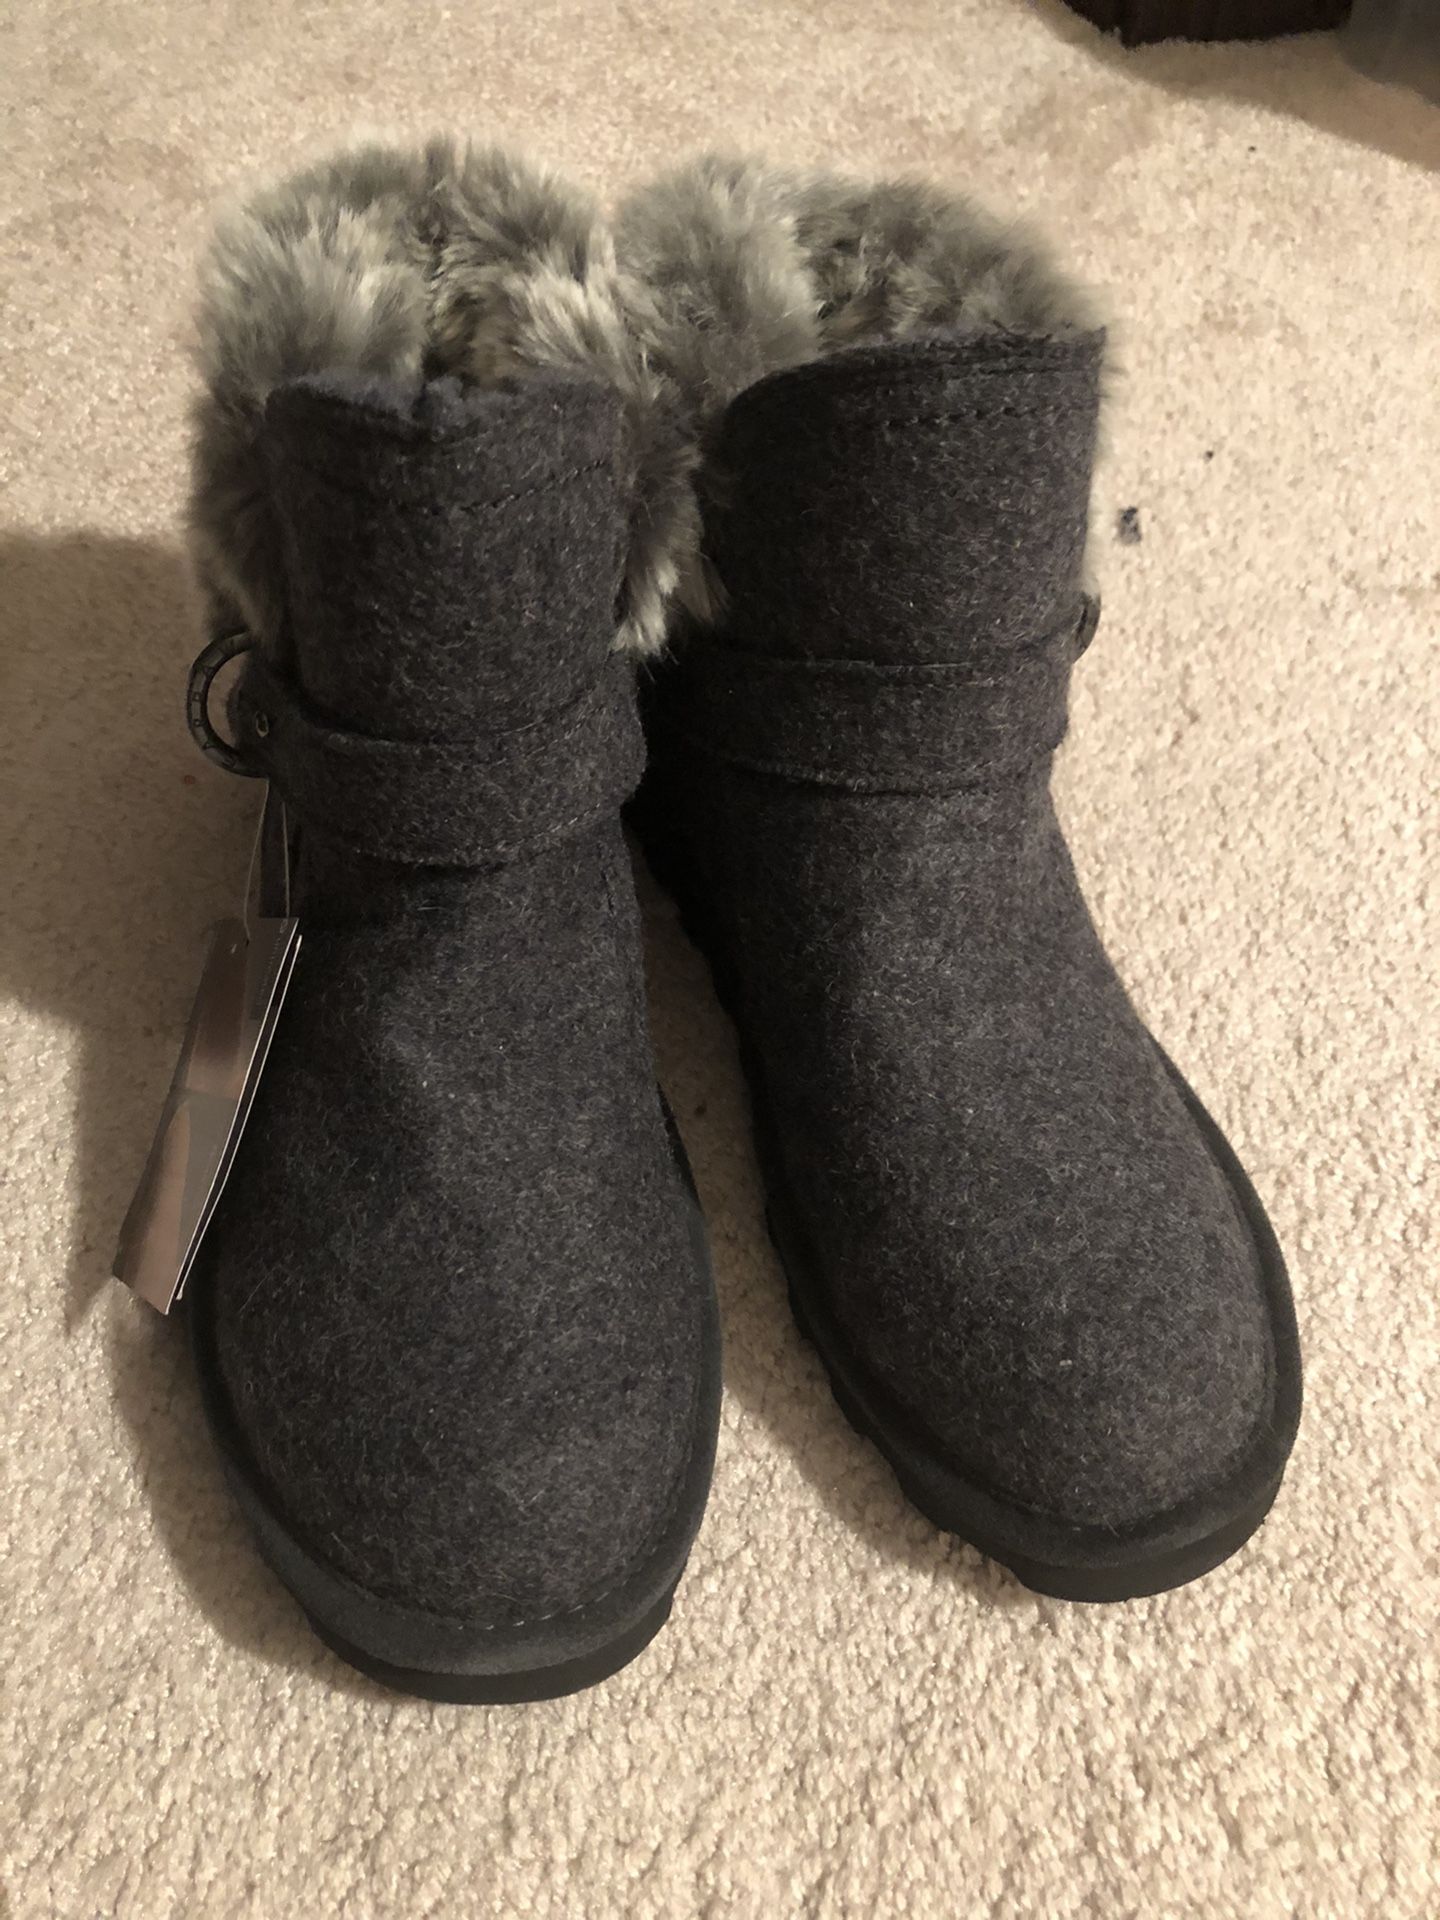 Bearpaws boots